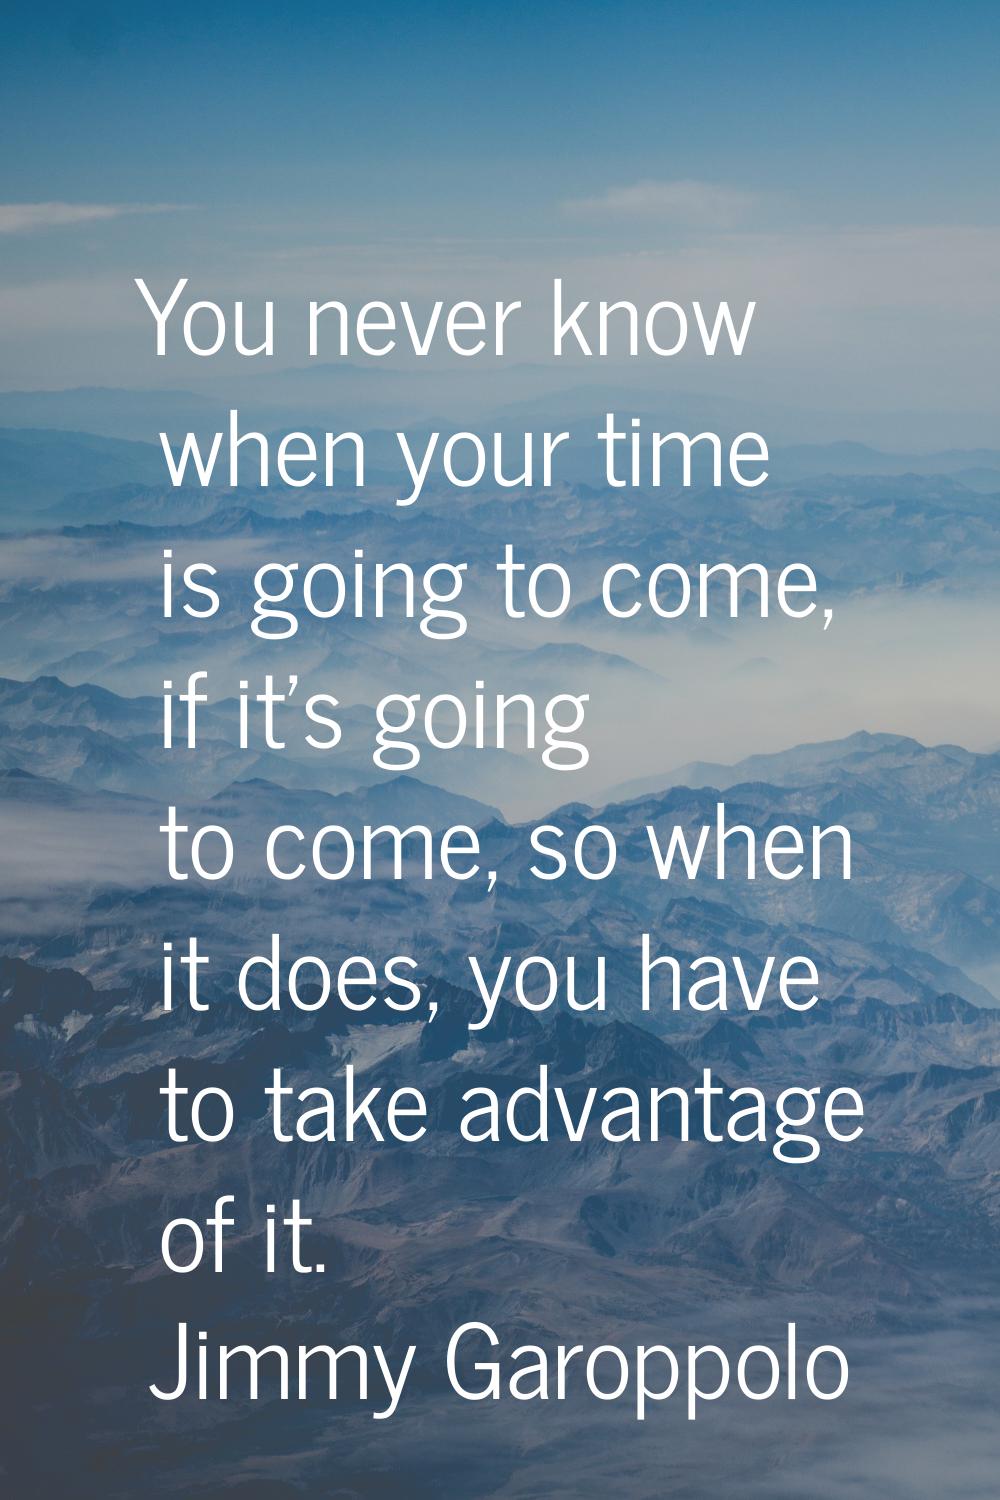 You never know when your time is going to come, if it's going to come, so when it does, you have to